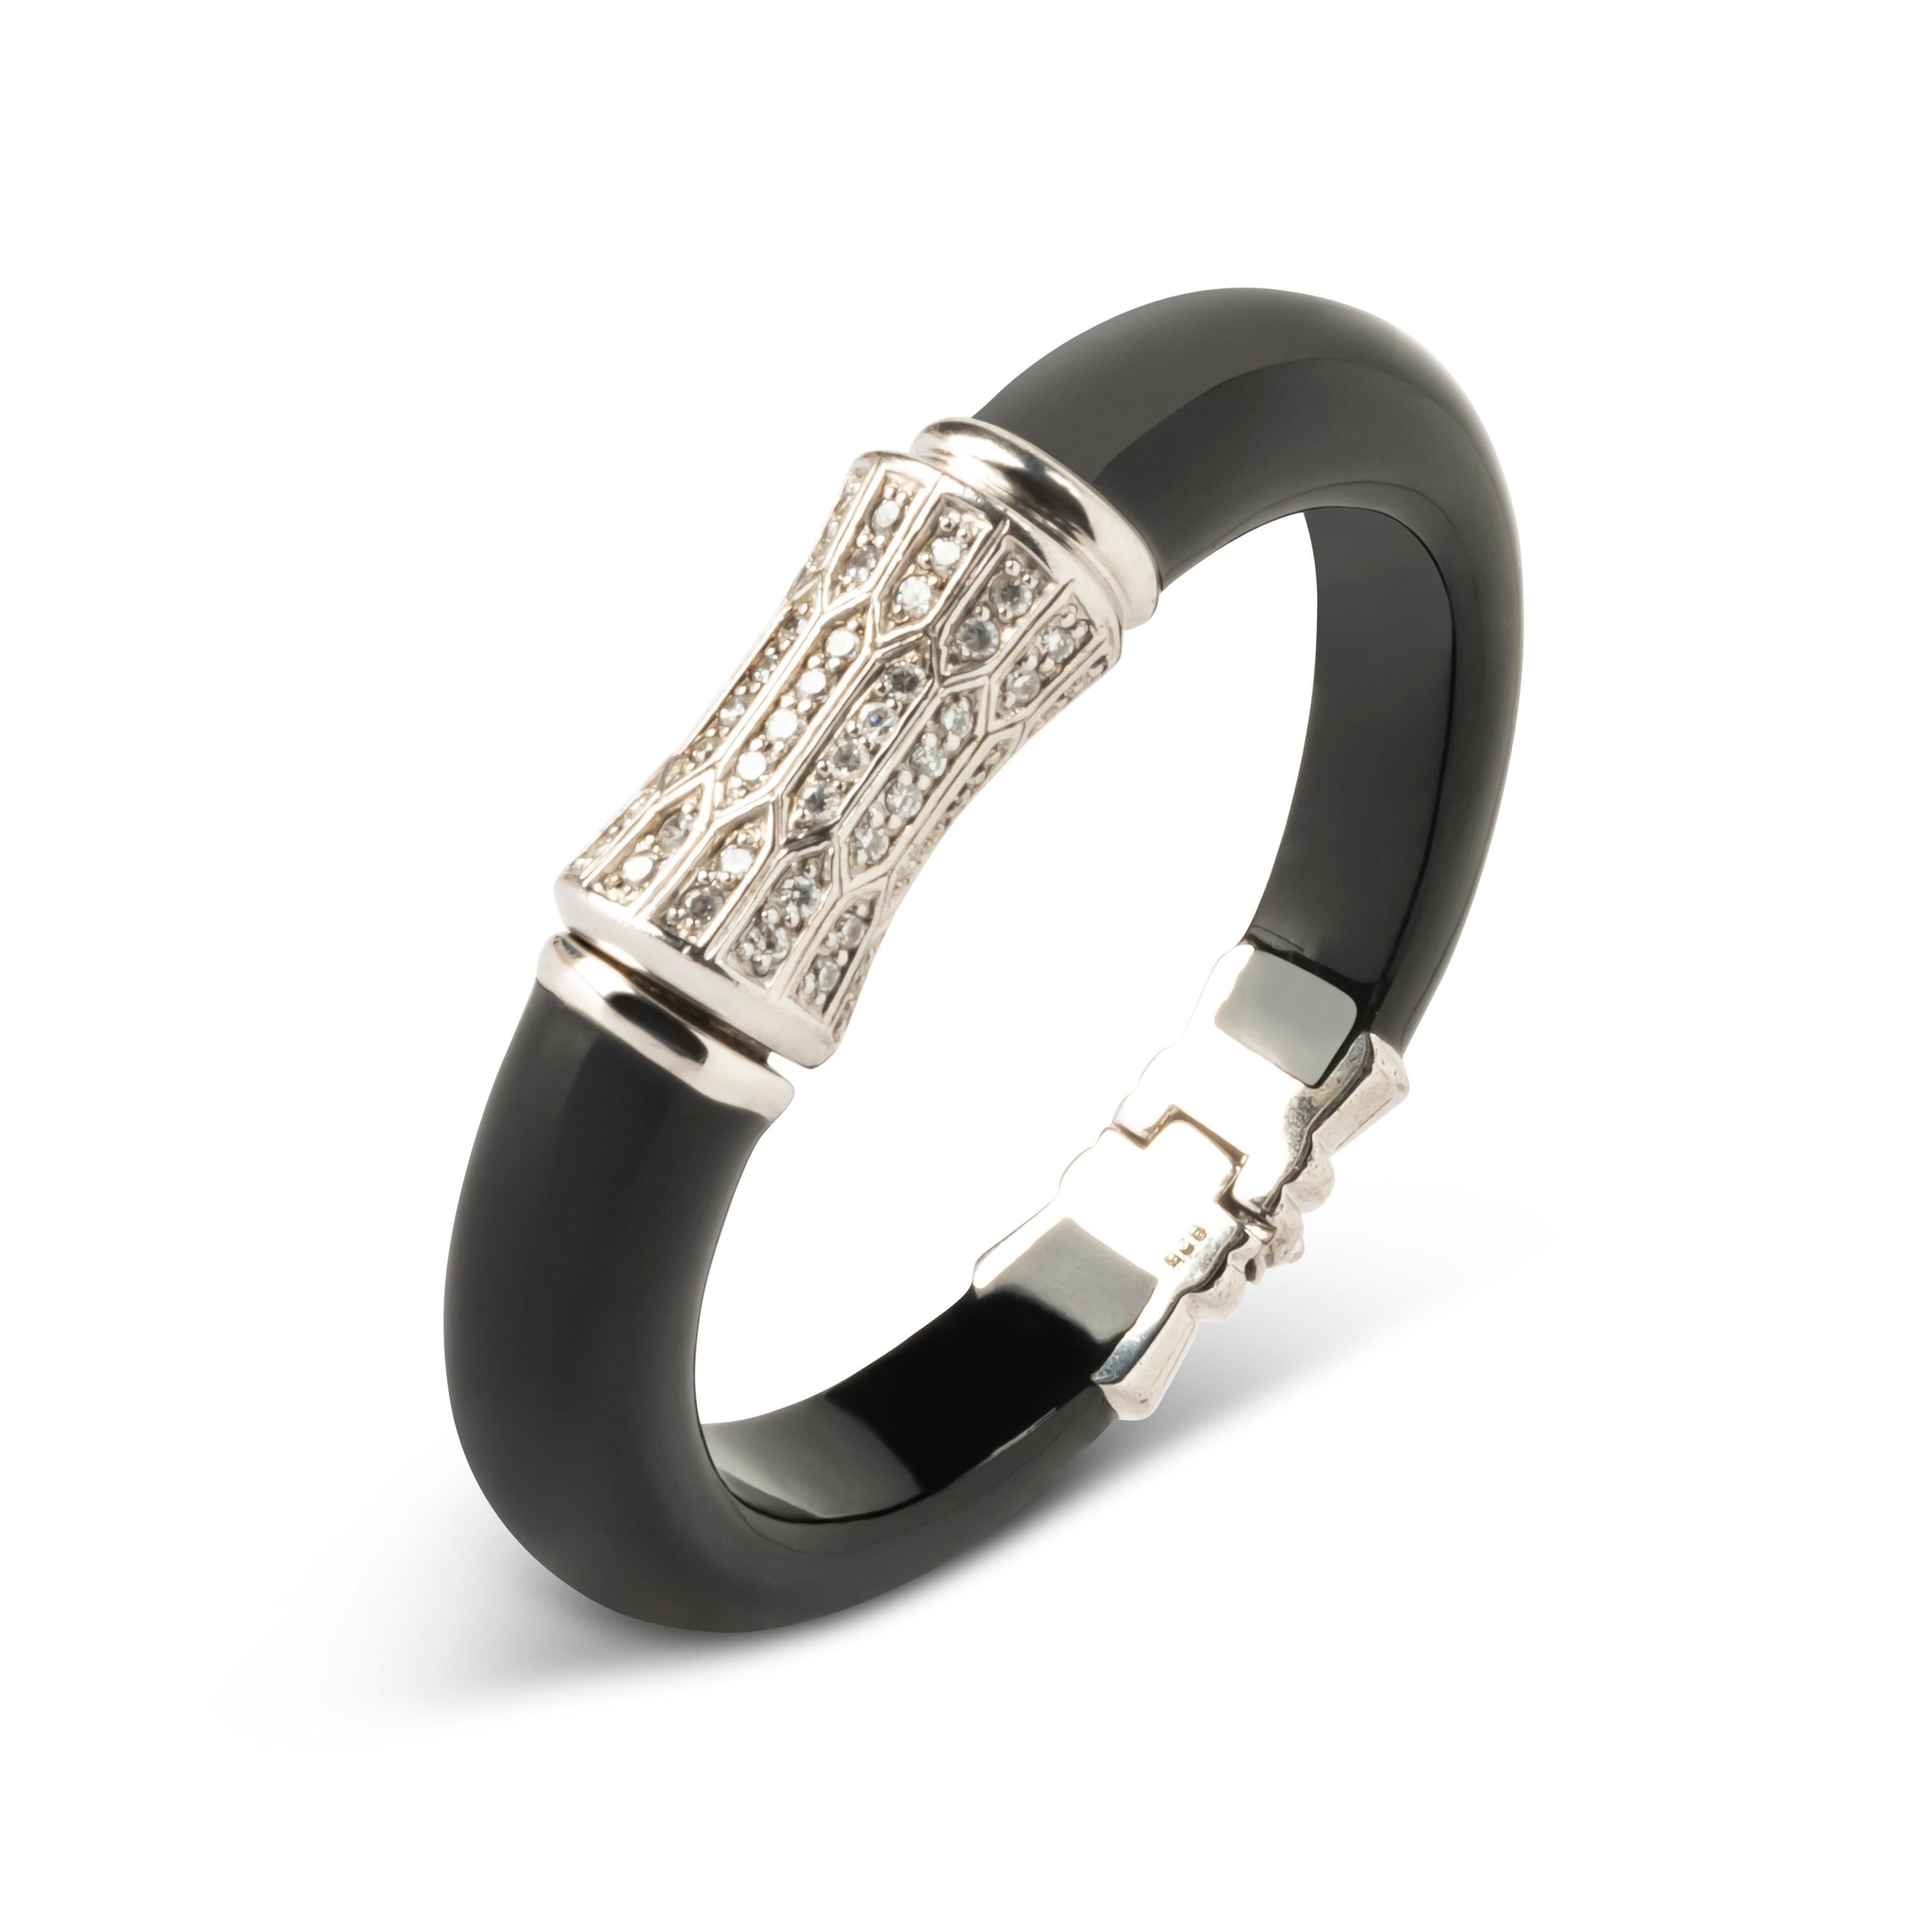 Fantastic Art Deco - Miriam Salat (MIRIM) bangle features black color resin with sterling silver and. White Topaz full facet round brilliant, prong set.
Bracelet has a magnetic closure; measures apx. 6-1/2 inches in circumference and apx. 1 inches